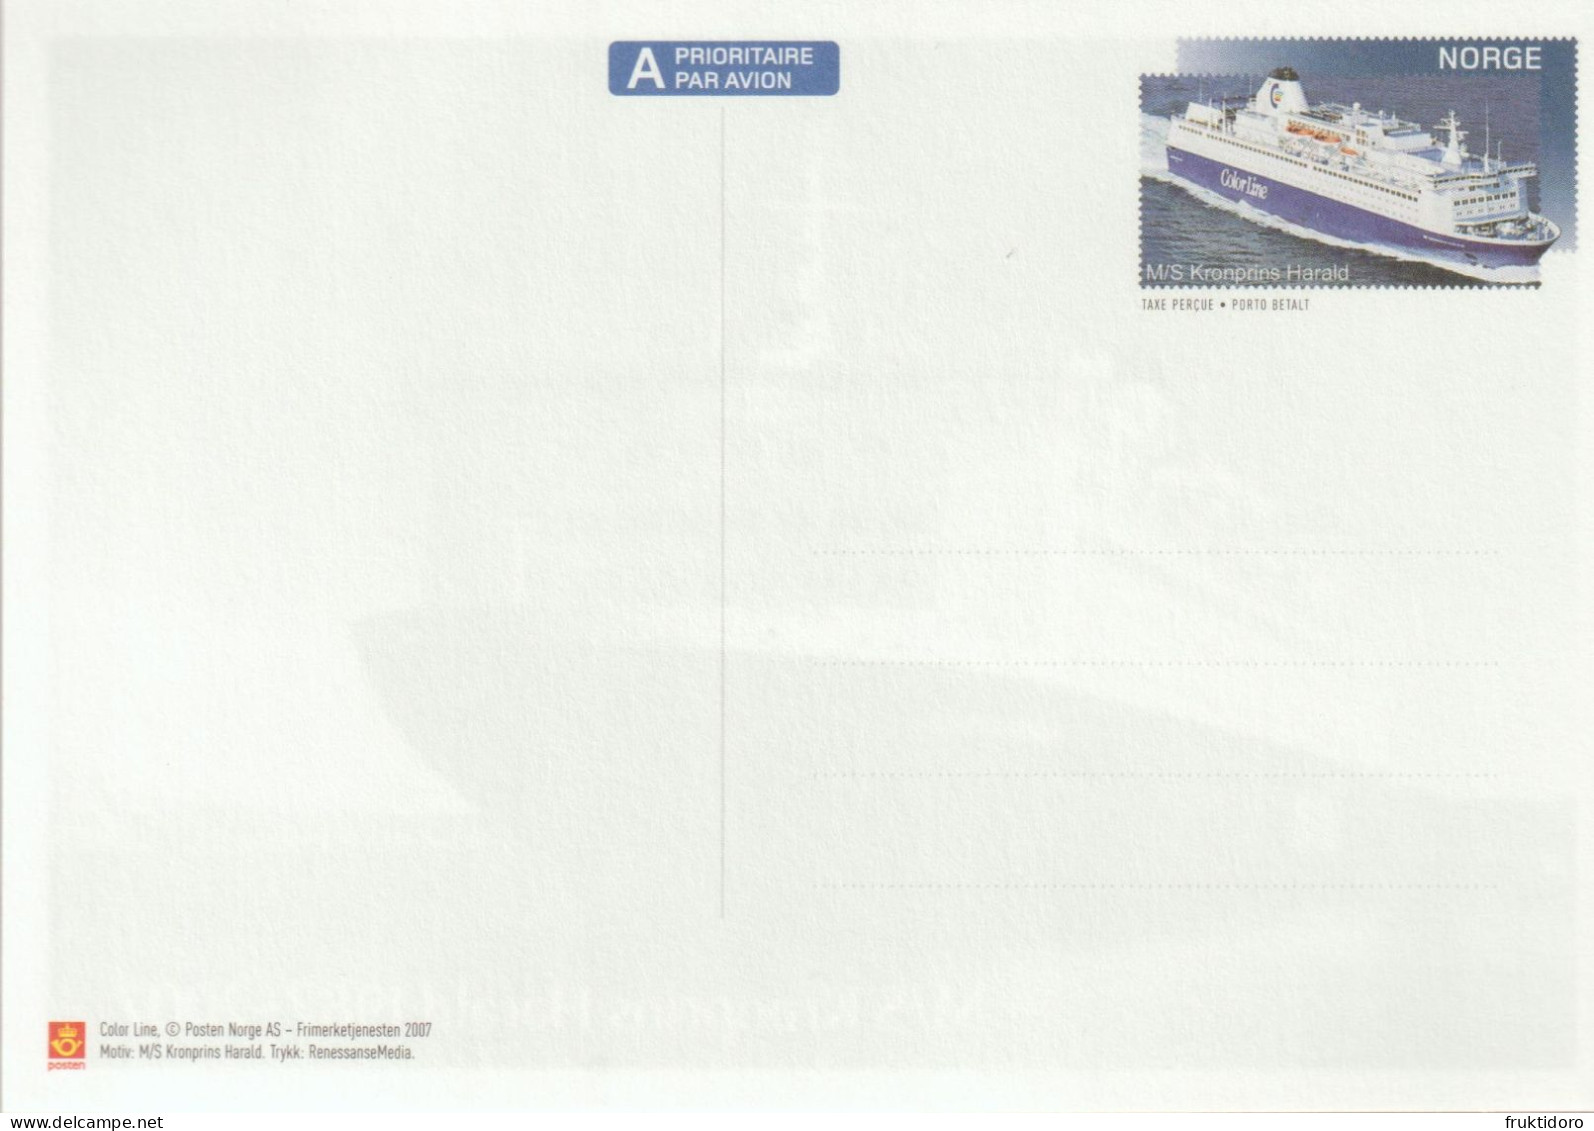 Norway Postal Stationery 2007 Ship M/S Crown Prince Haral 1987-2007 ** - Postal Stationery